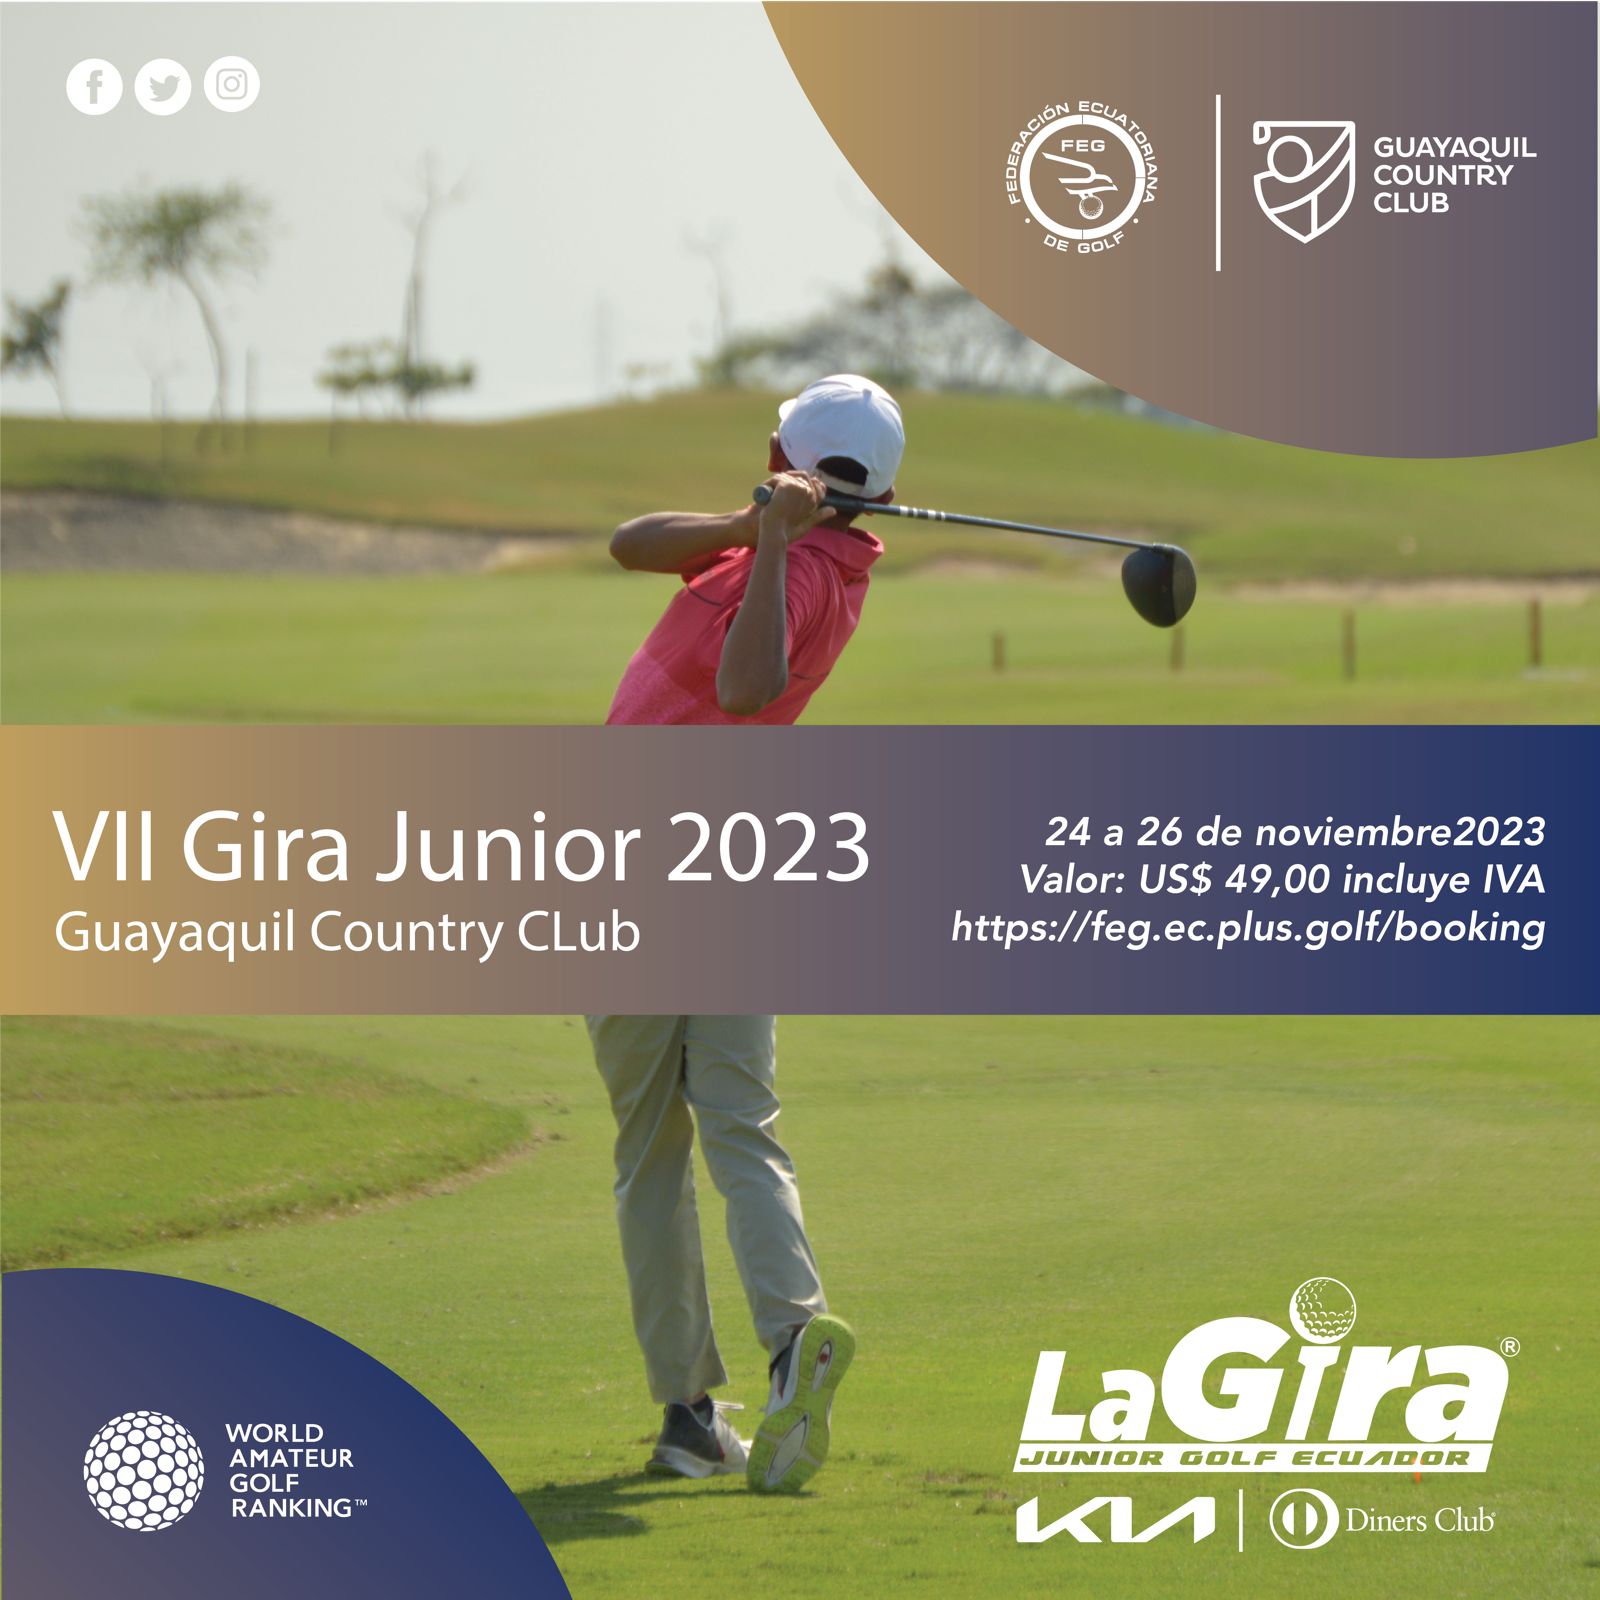 Gira Junior del Guayaquil Country Club 2023